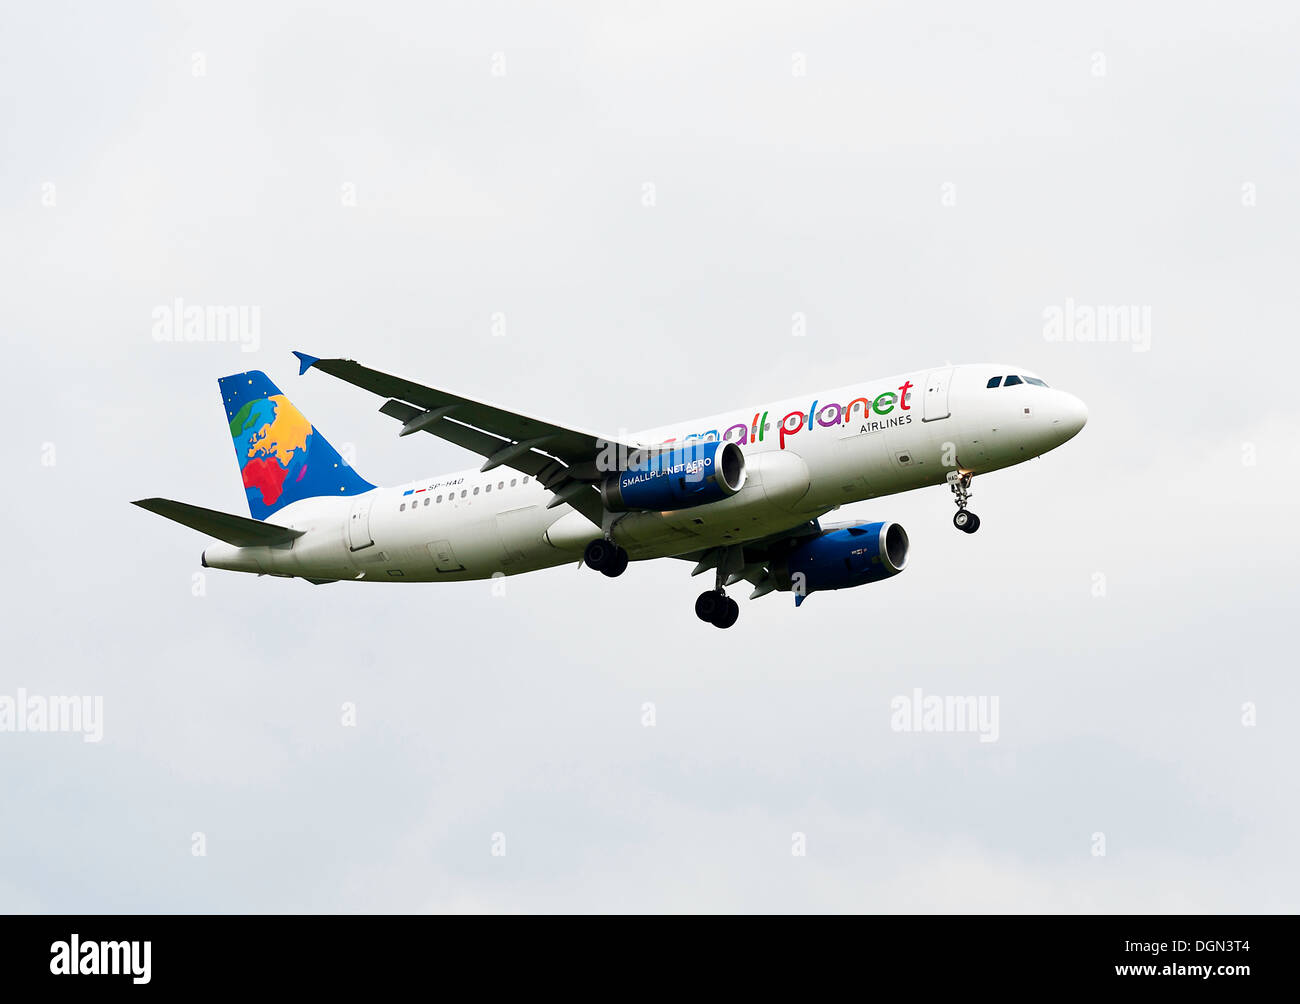 Small Planet Airlines Airbus A320 Airliner on Approach for Landing at London Gatwick Airport West Sussex England United Kingdom Stock Photo